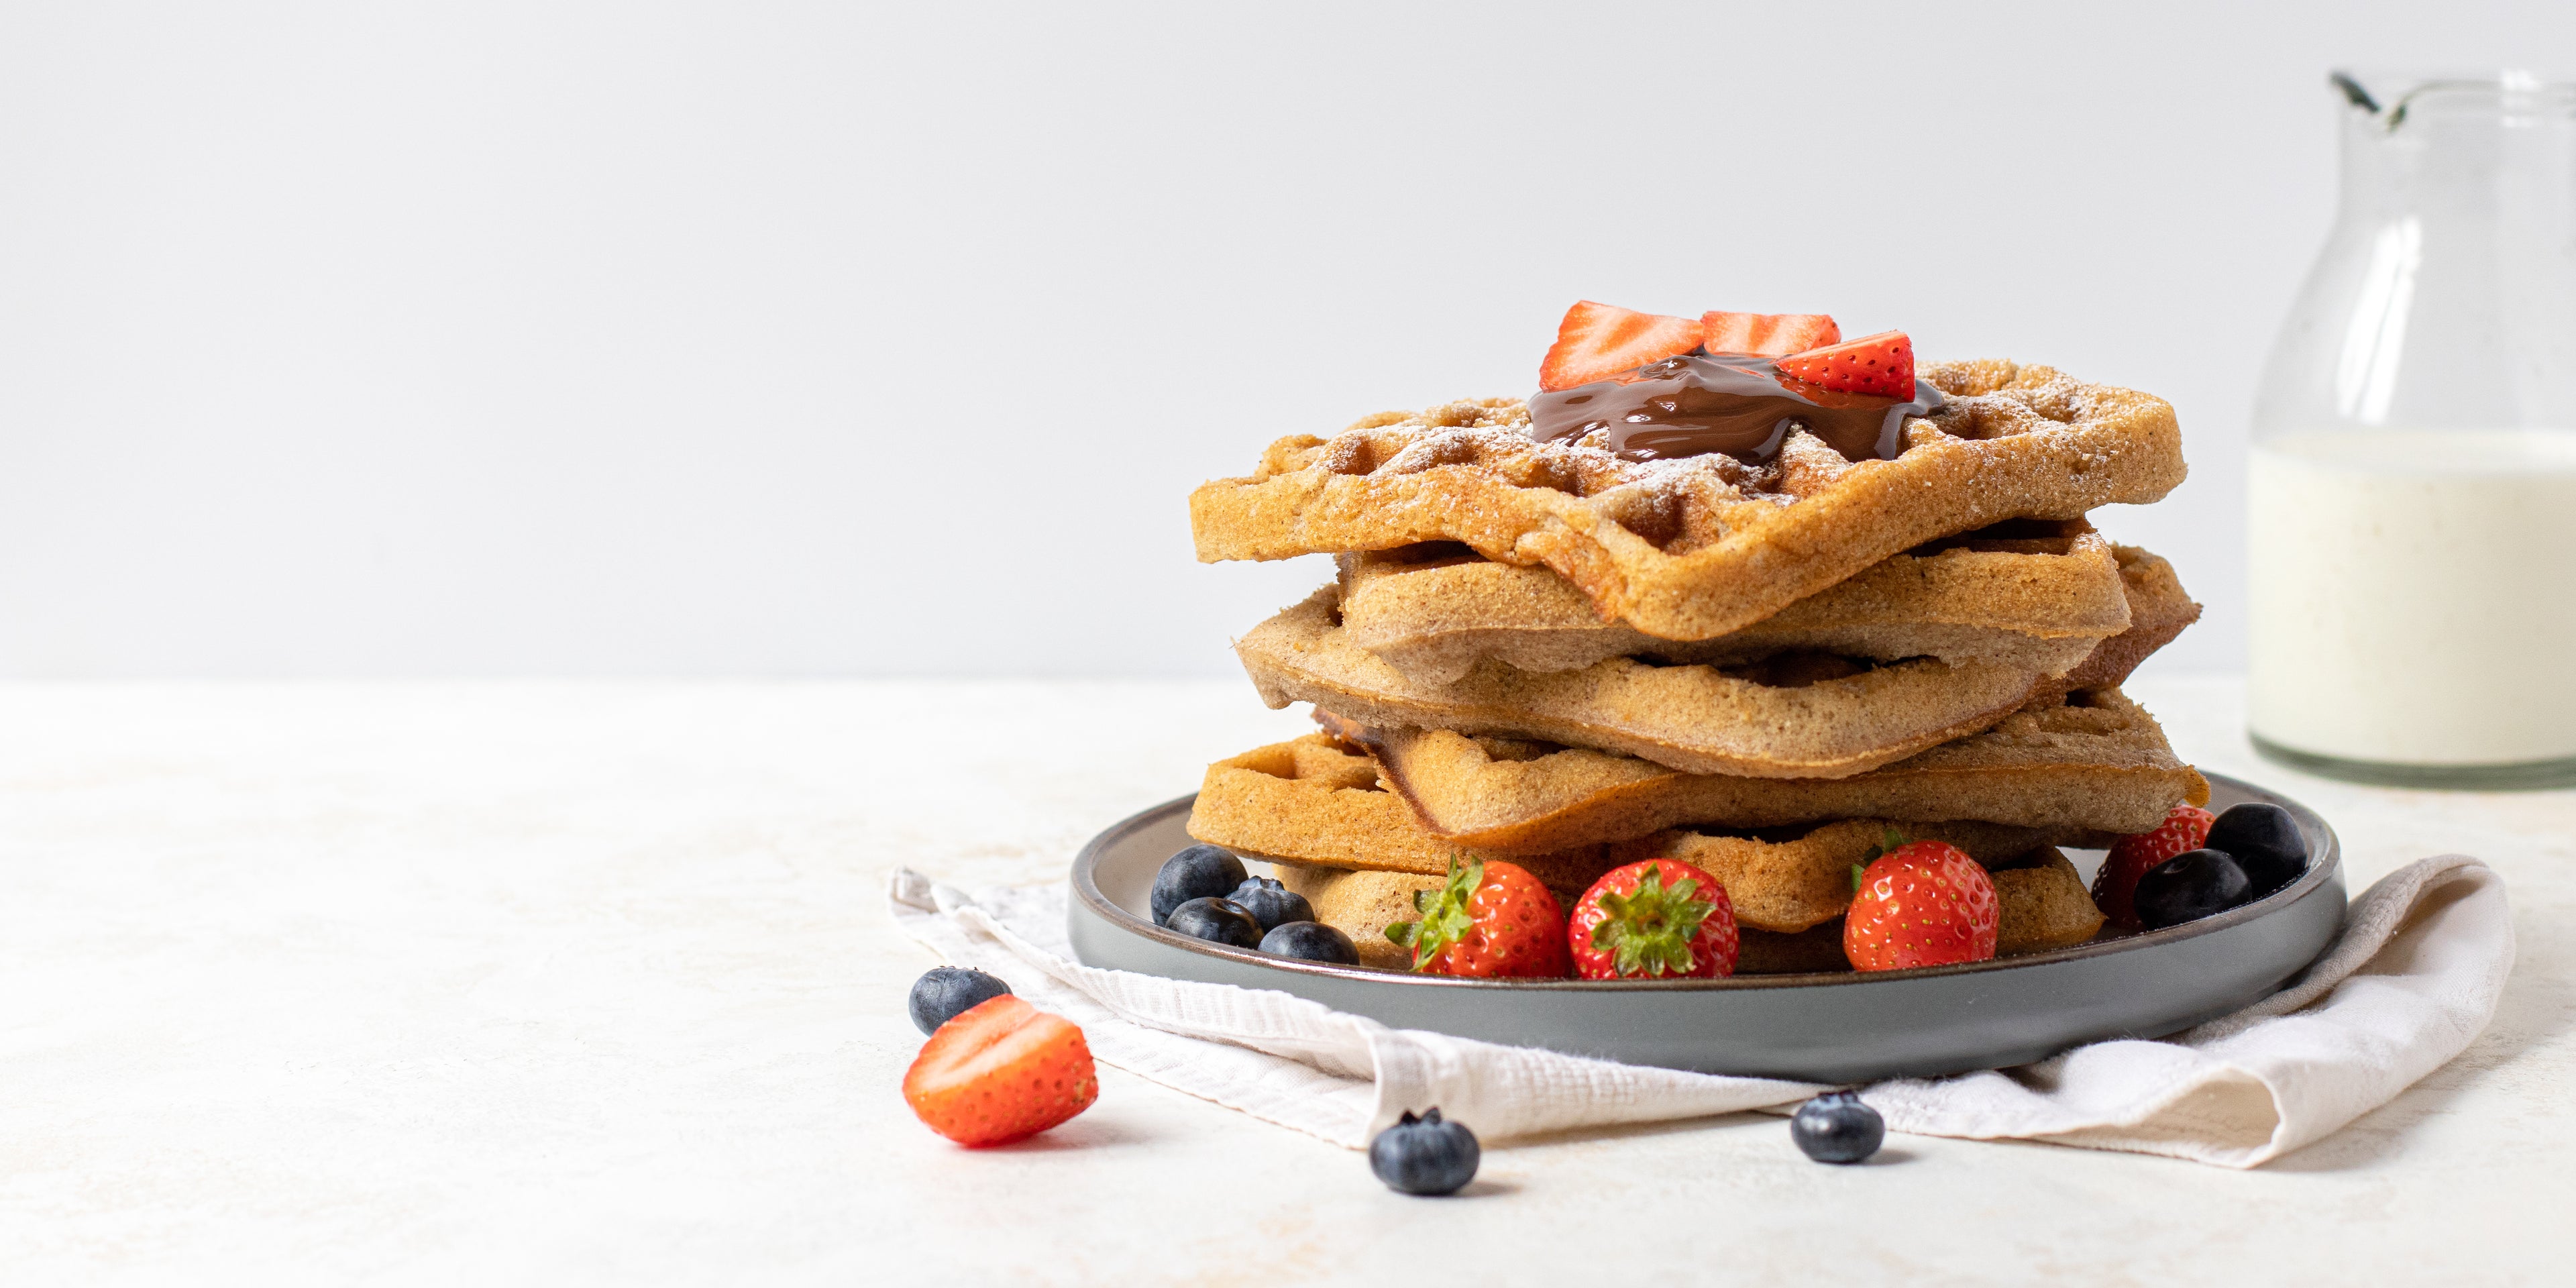 Stack of Waffles topped with berries, chocolate sauce and dusted with icing sugar